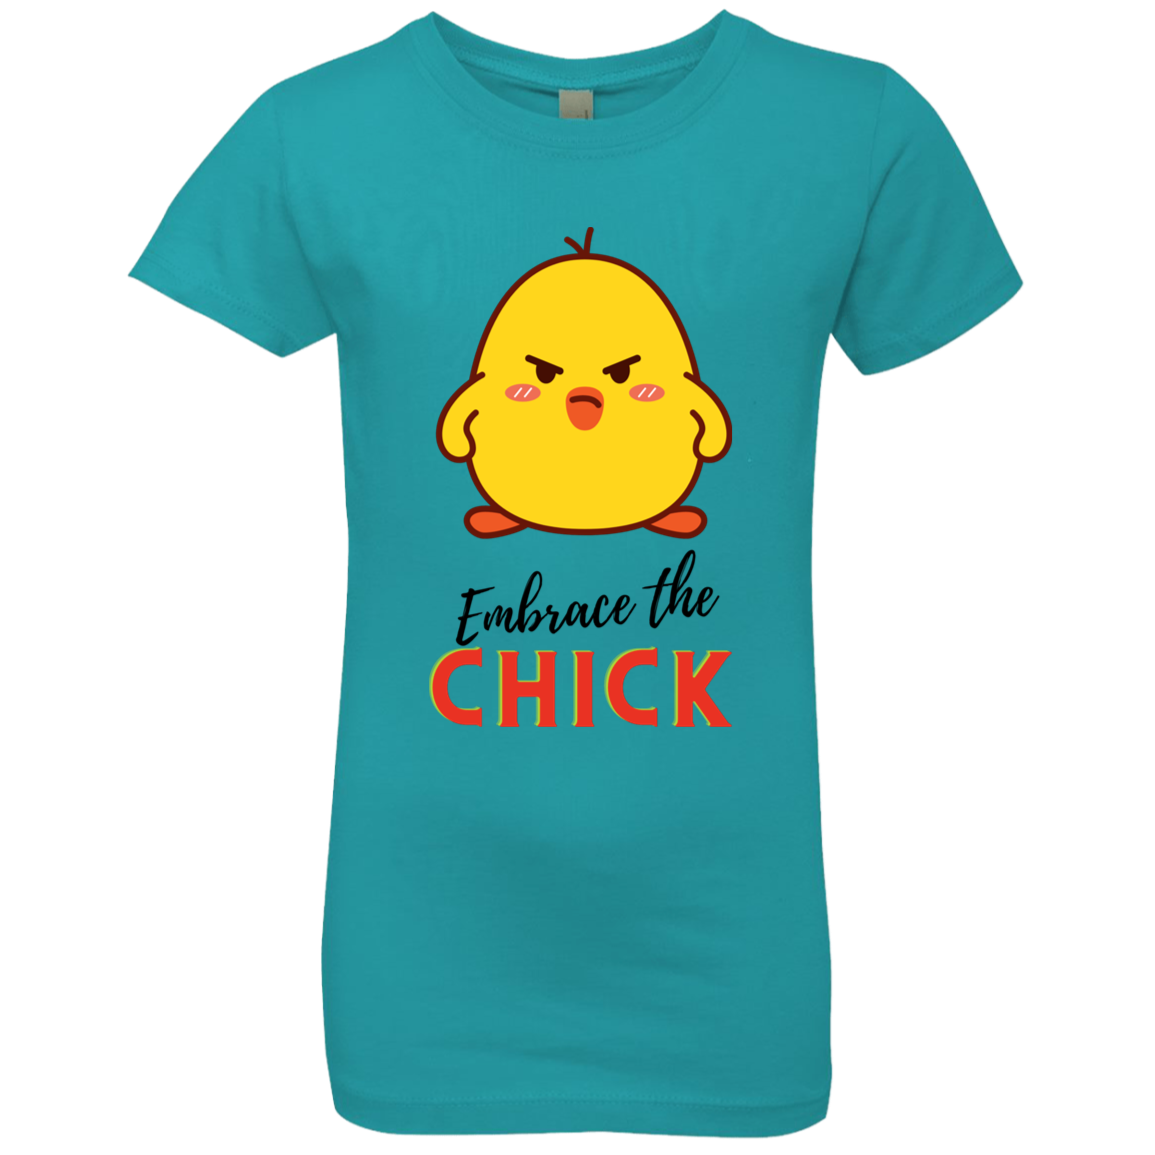 Embrace The Chick - Girls', Teen, Youth T-Shirt